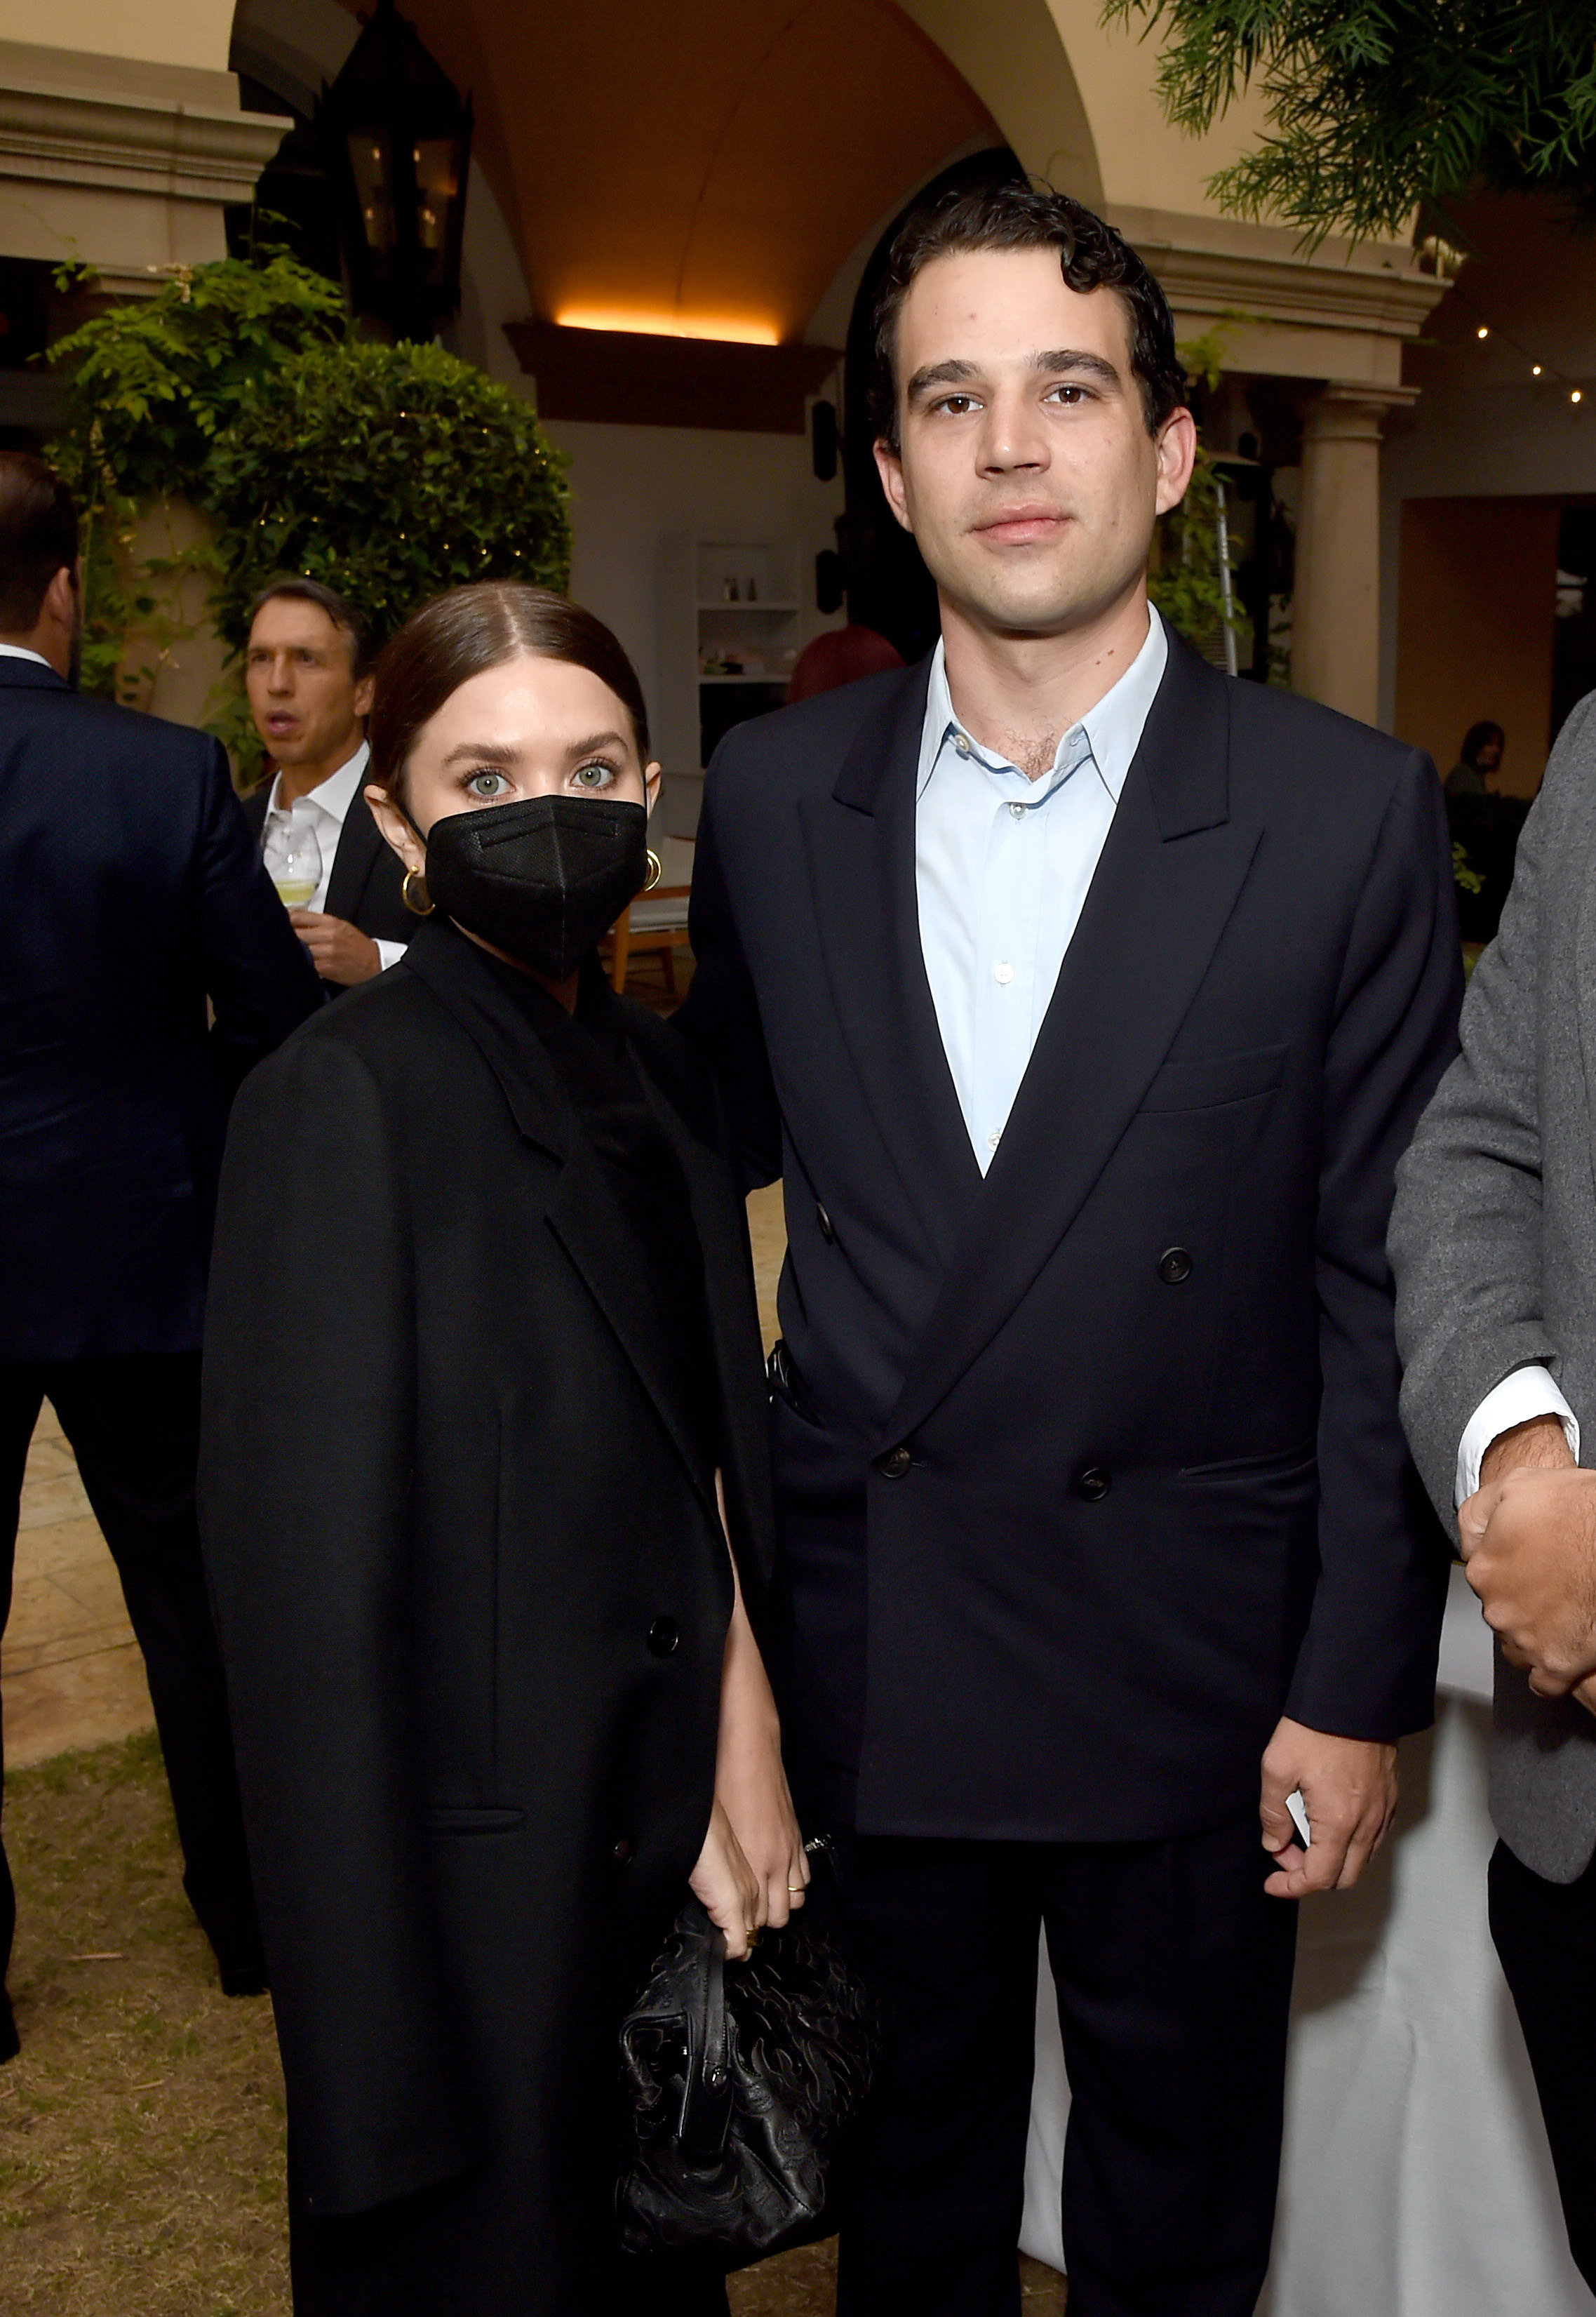 the two at an event with Ashley wearing a mask